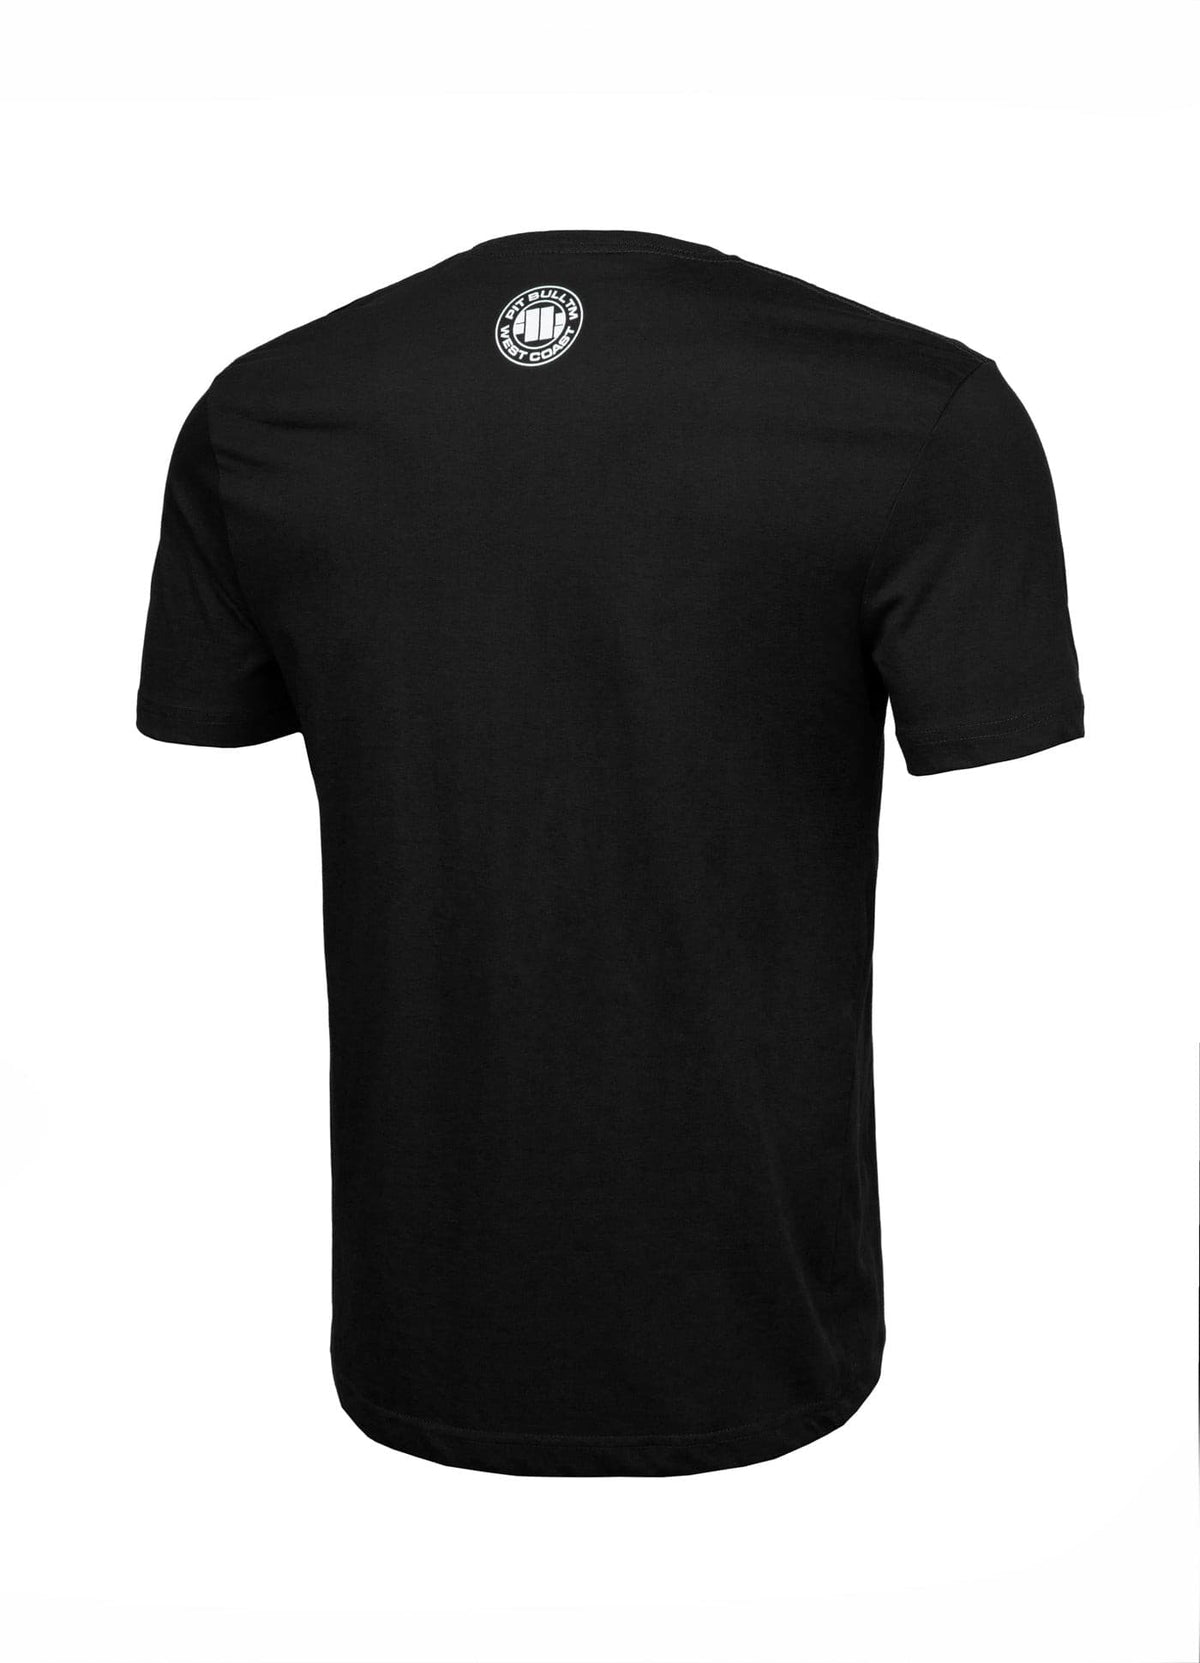 Official ADCC Black T-Shirt.